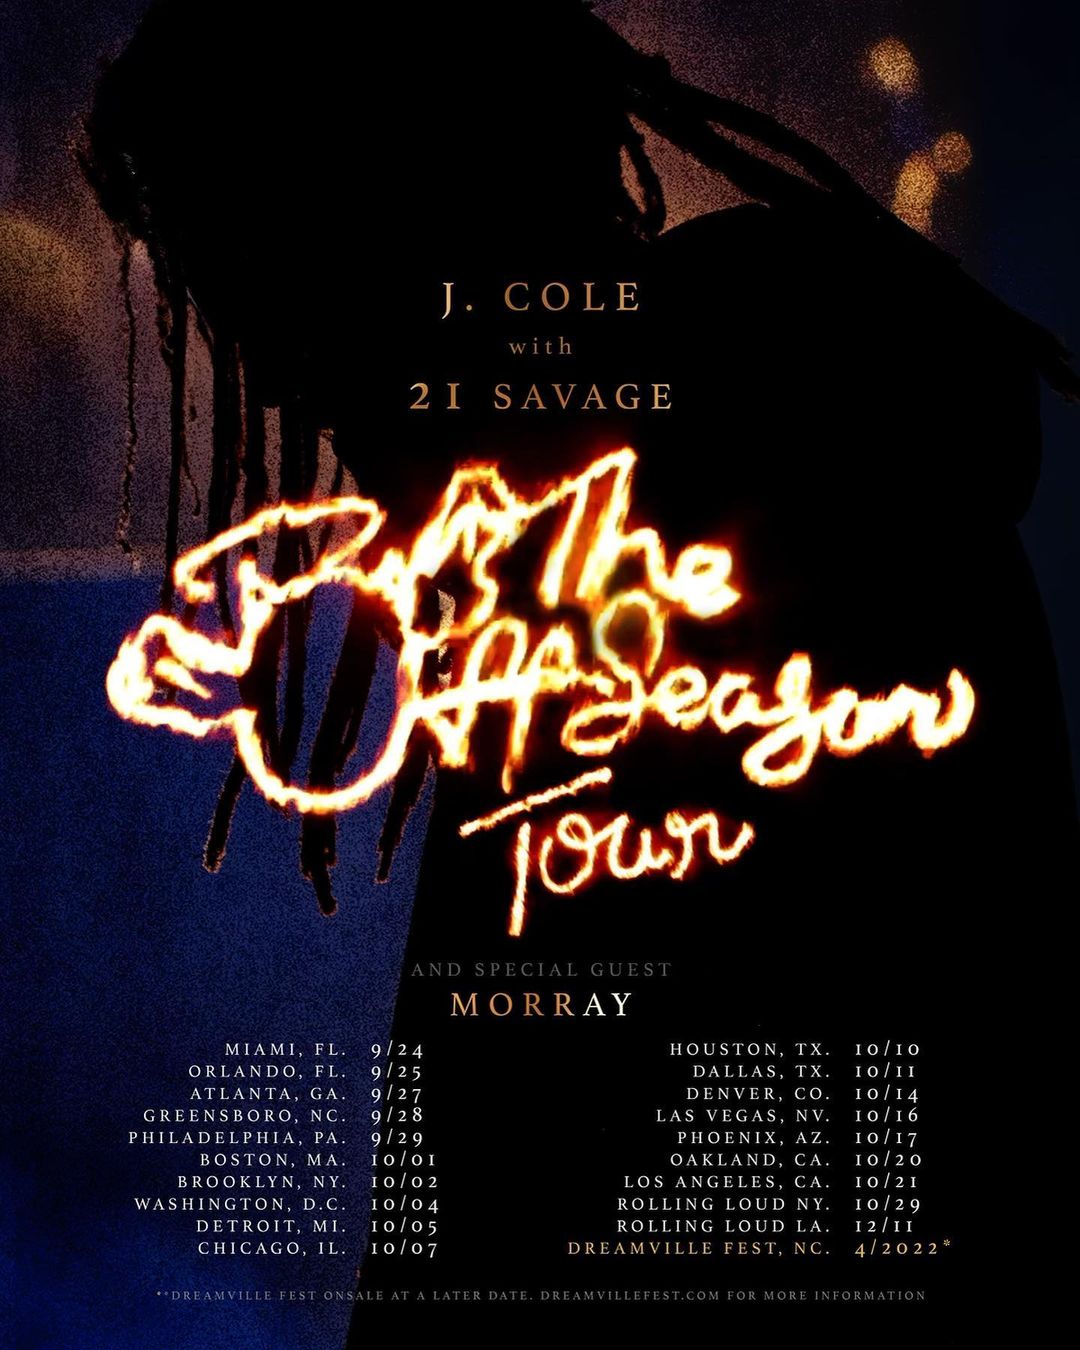 J. Cole is Coming to FTX Arena. Here's Why We Think He's the Hoodie King